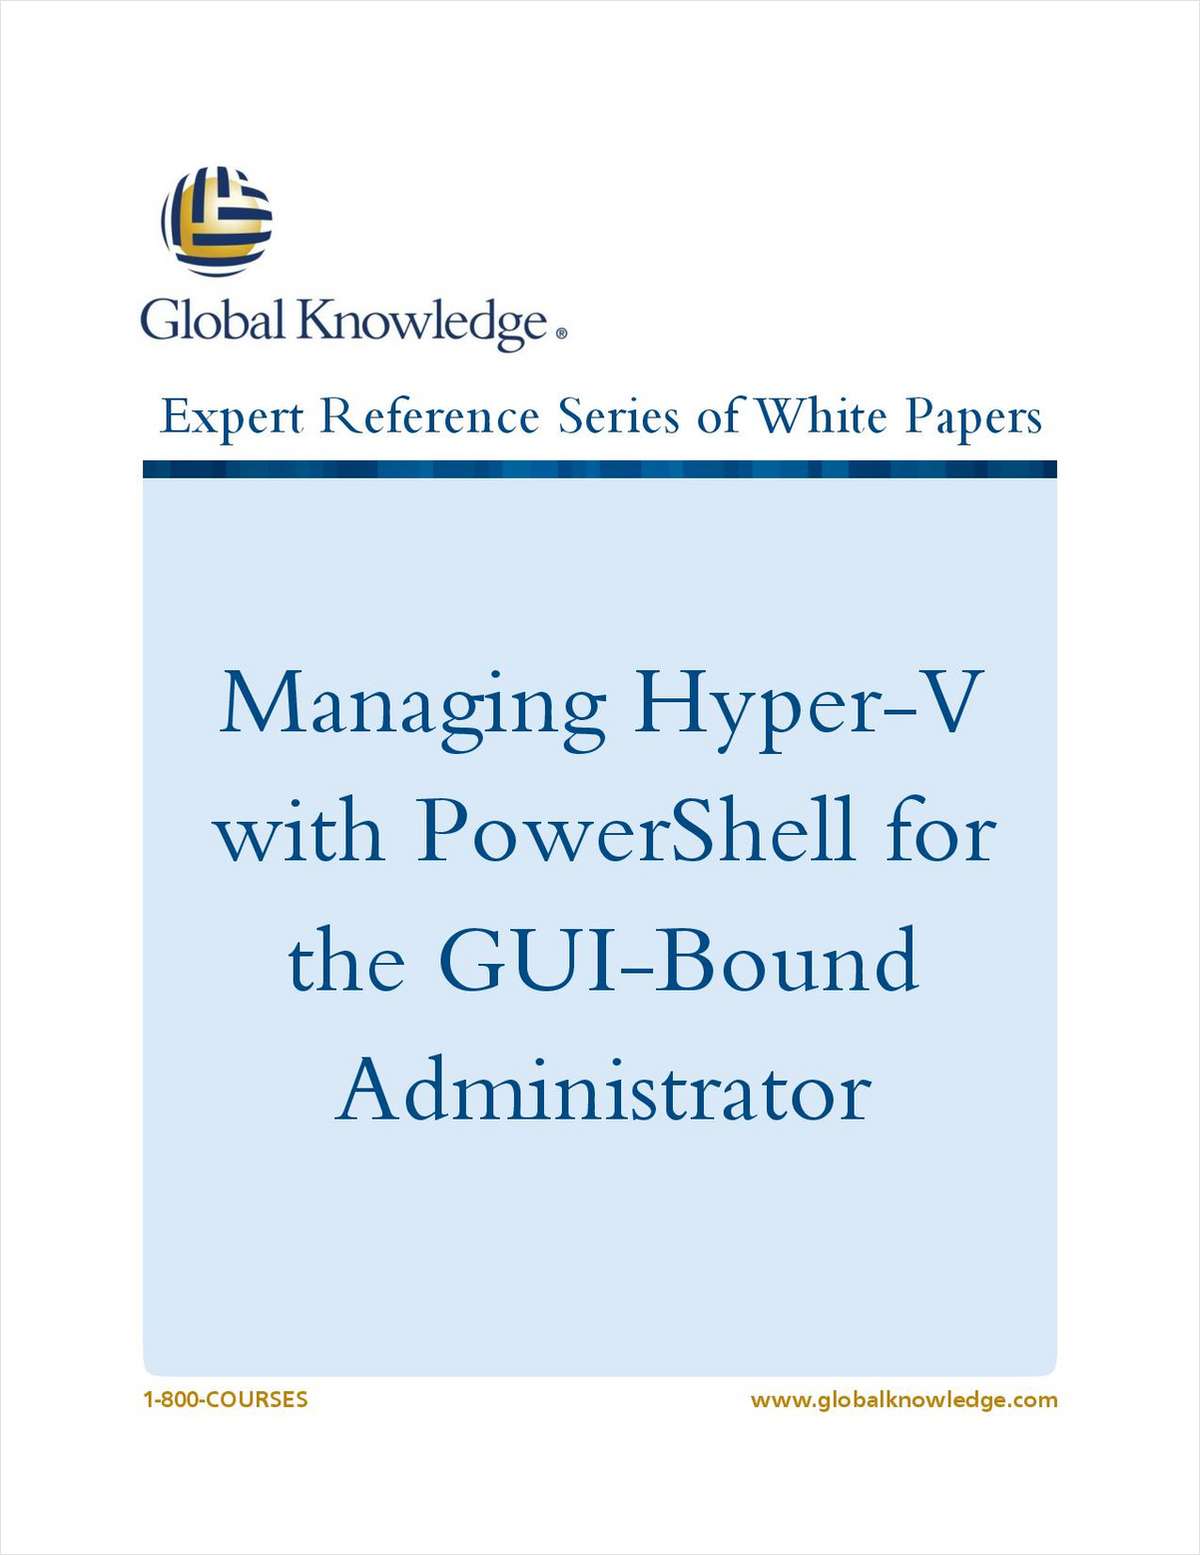 Managing Hyper-V with PowerShell for the GUI-Bound Administrator